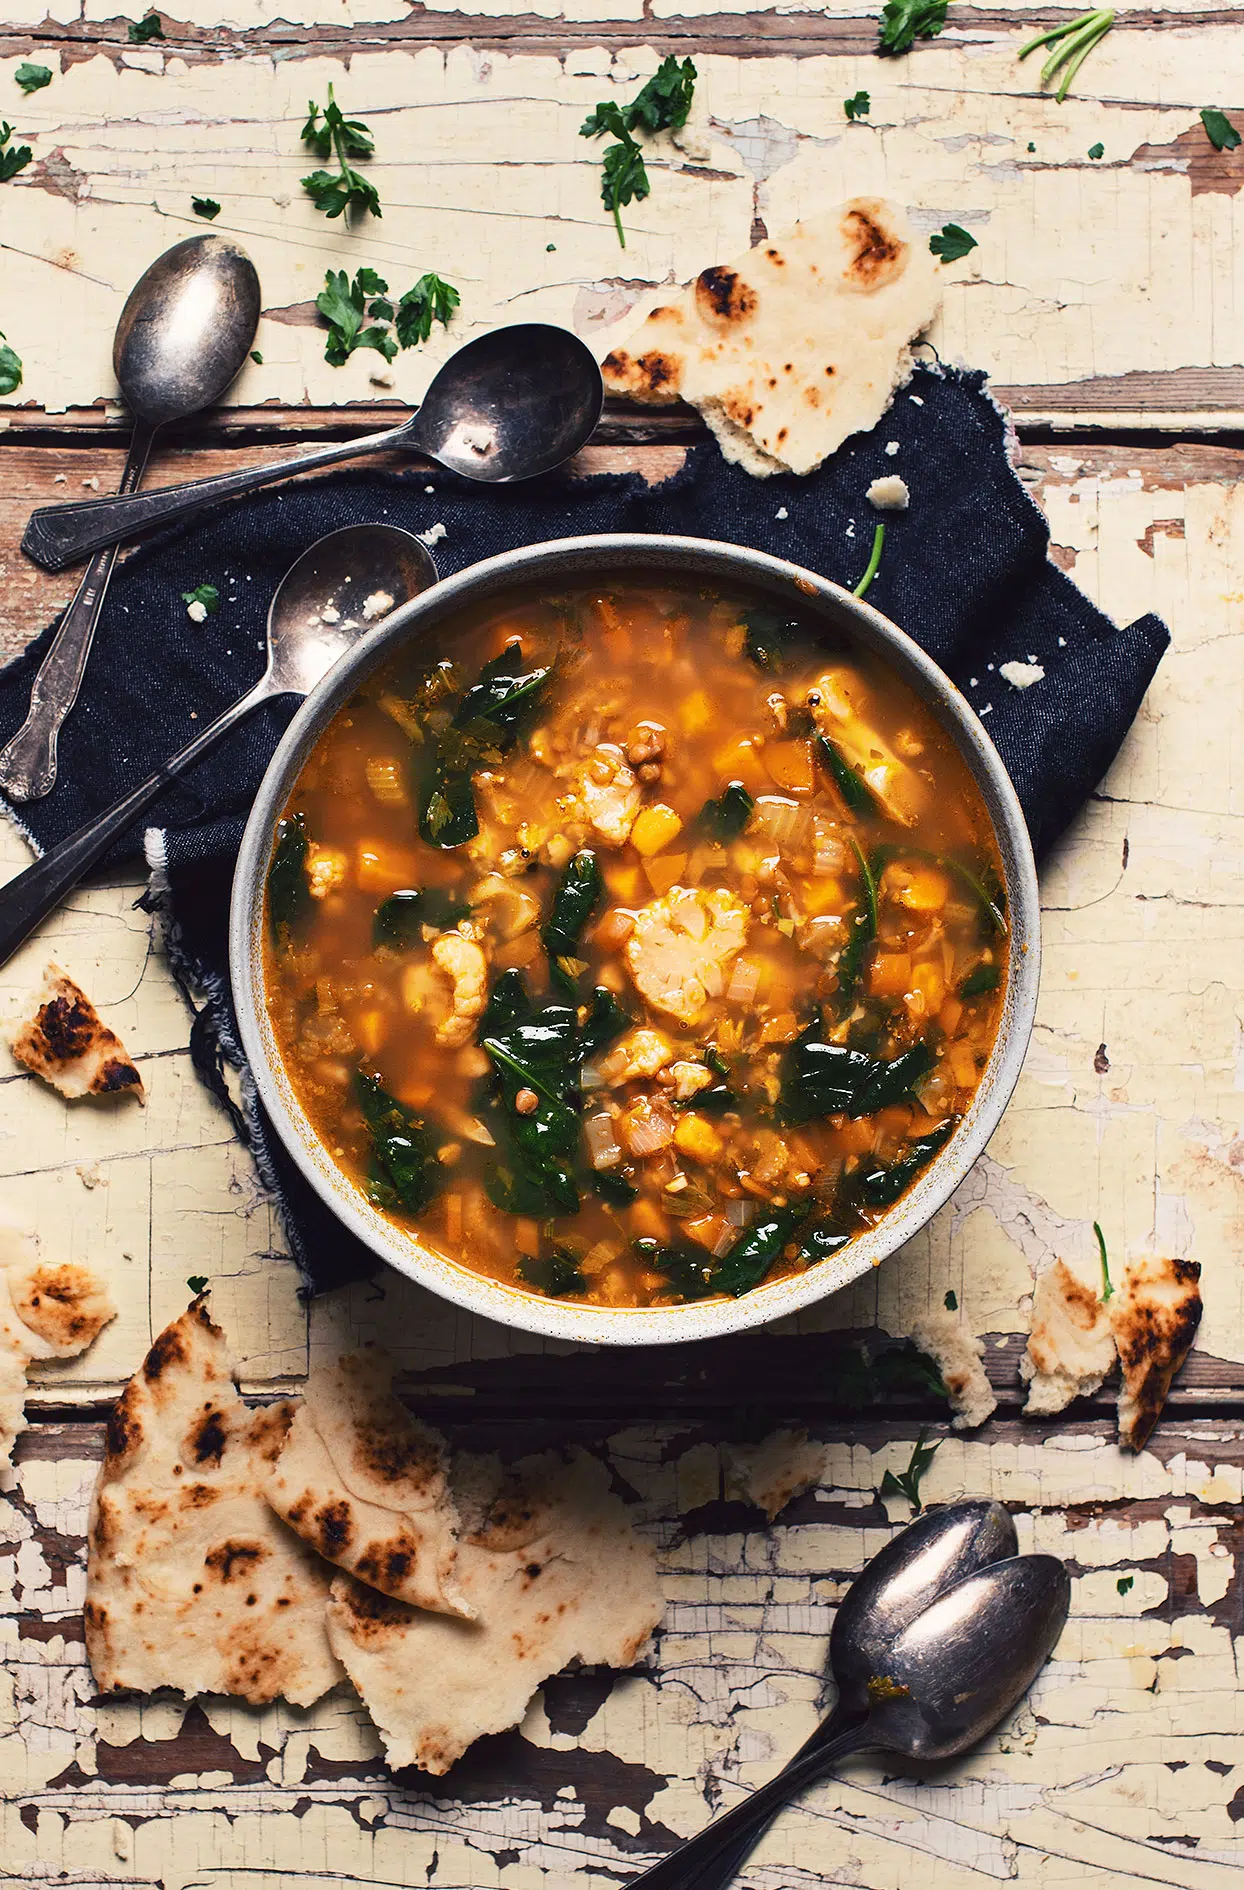 Moroccan soup with sweet potato and lentils